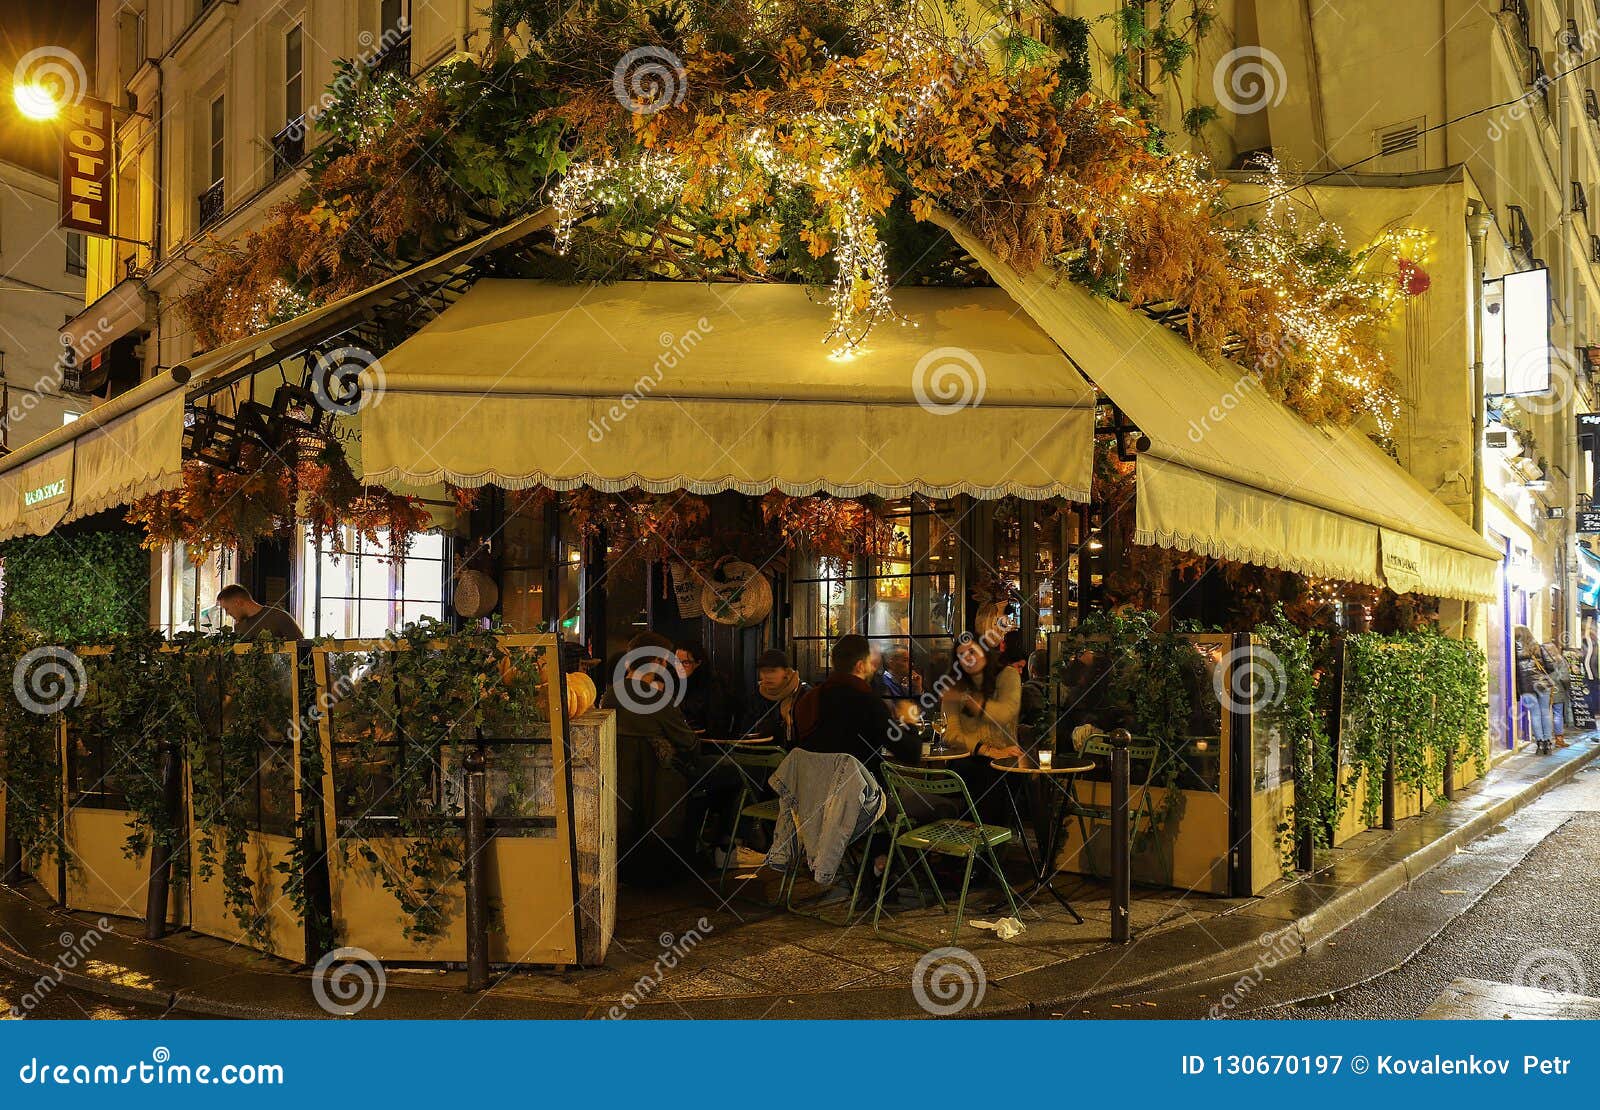 The Traditional French Cafe Maison Sauvage Located Near ...